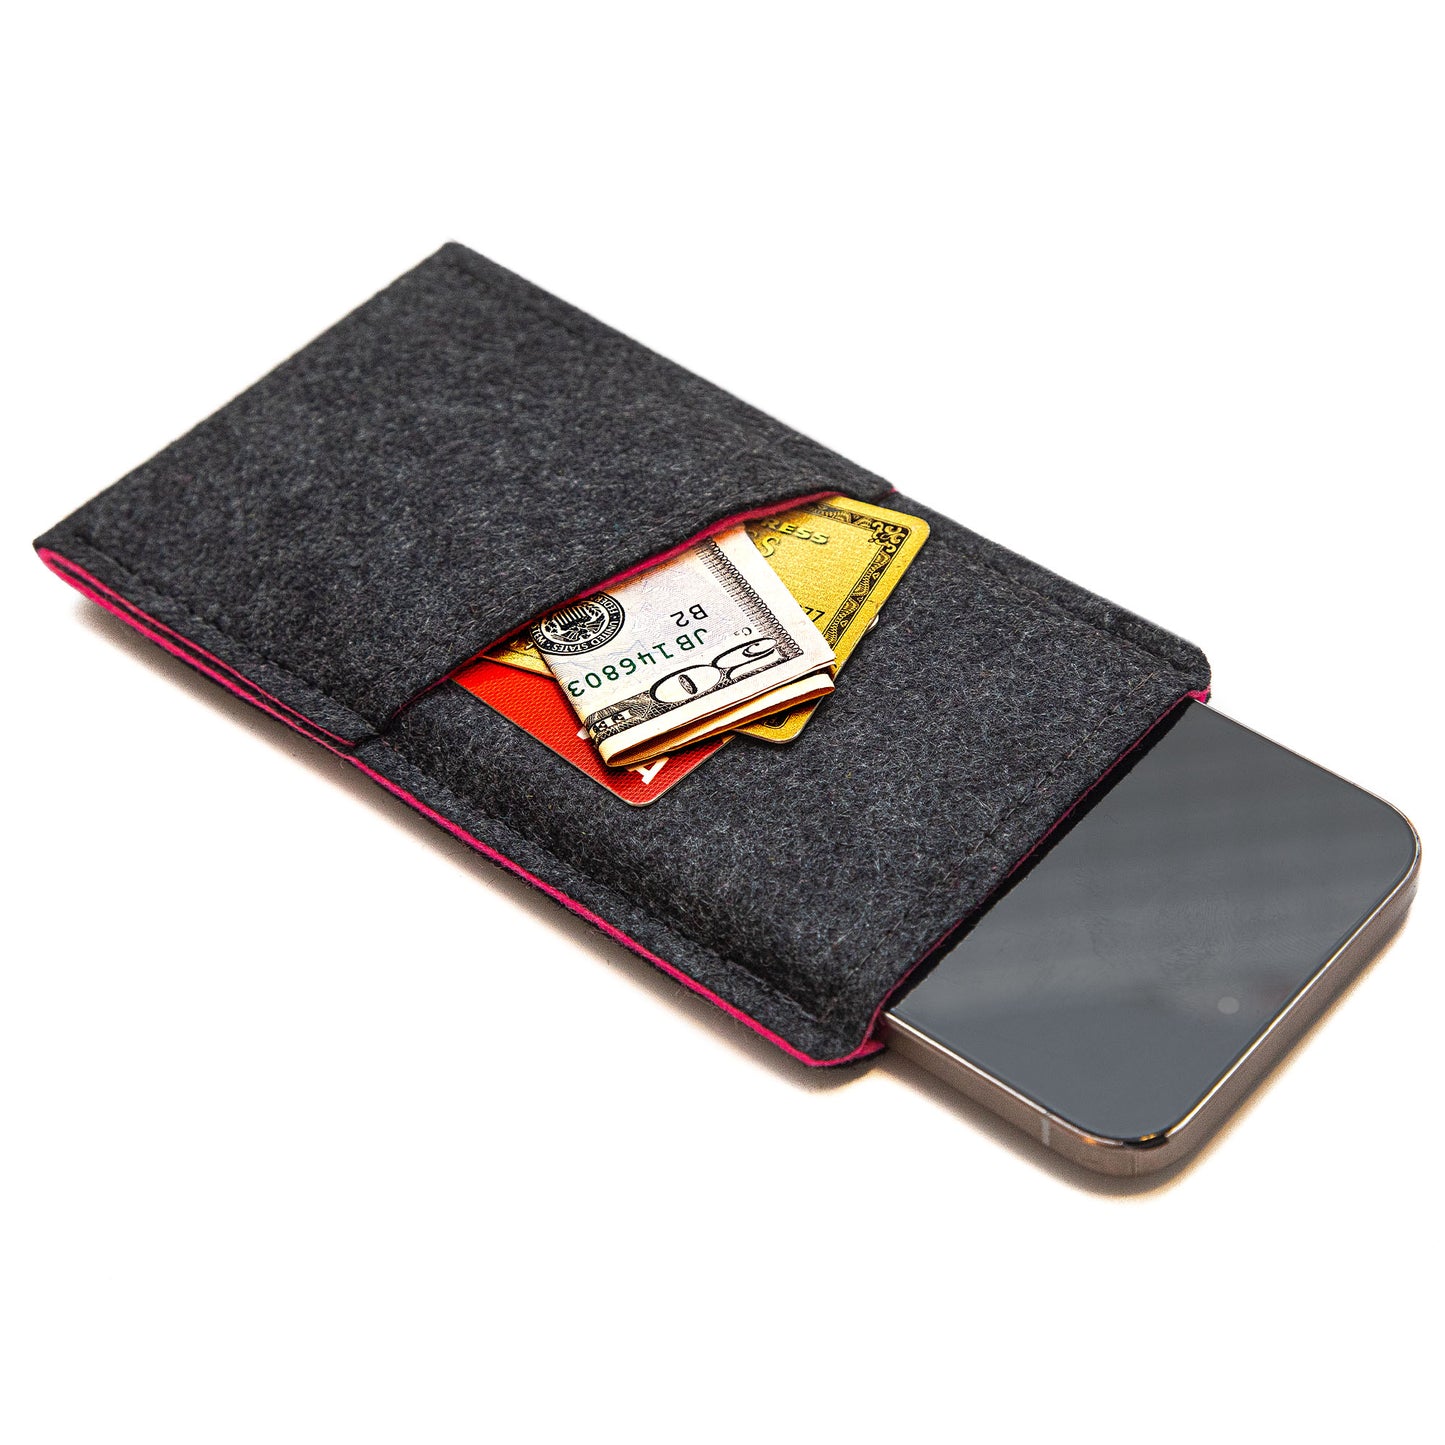 Premium Felt iPhone Sleeve with Card Pocket - Charcoal & Pink